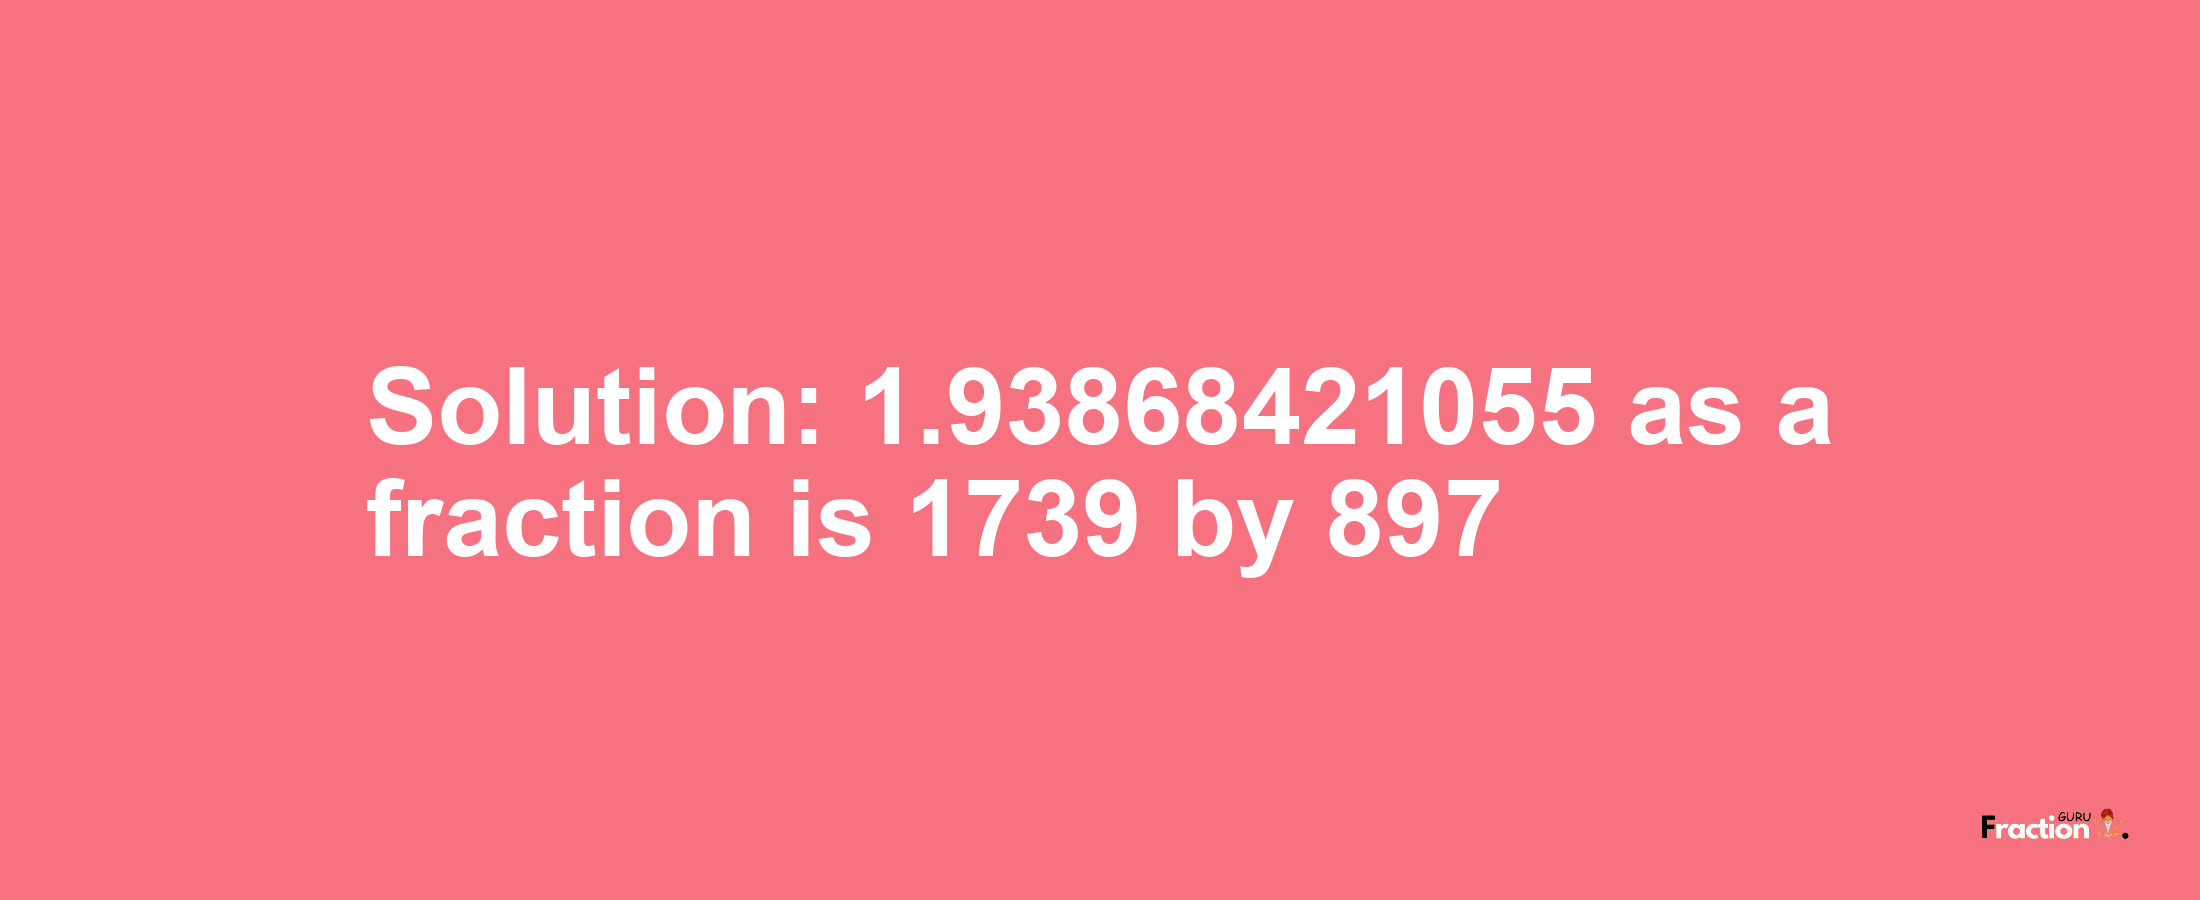 Solution:1.93868421055 as a fraction is 1739/897